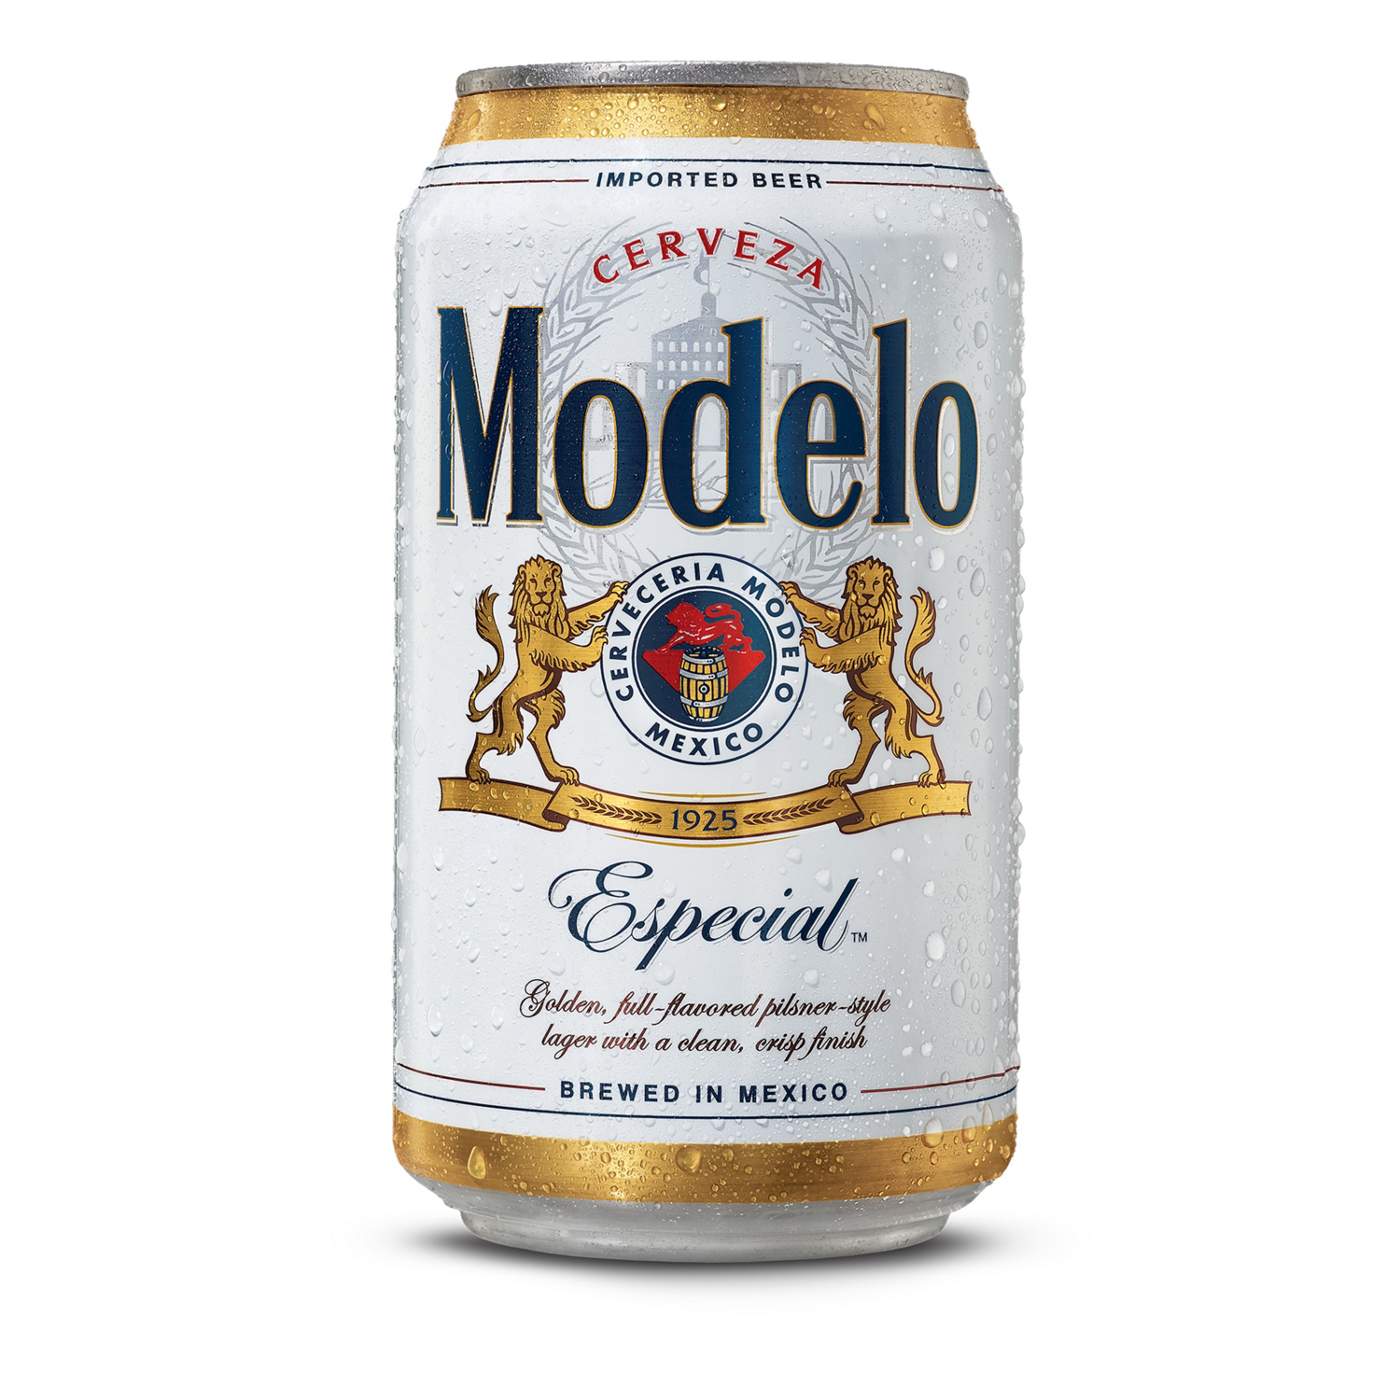 Modelo Especial Mexican Lager Import Beer 12 oz Cans, 6 pk; image 4 of 11